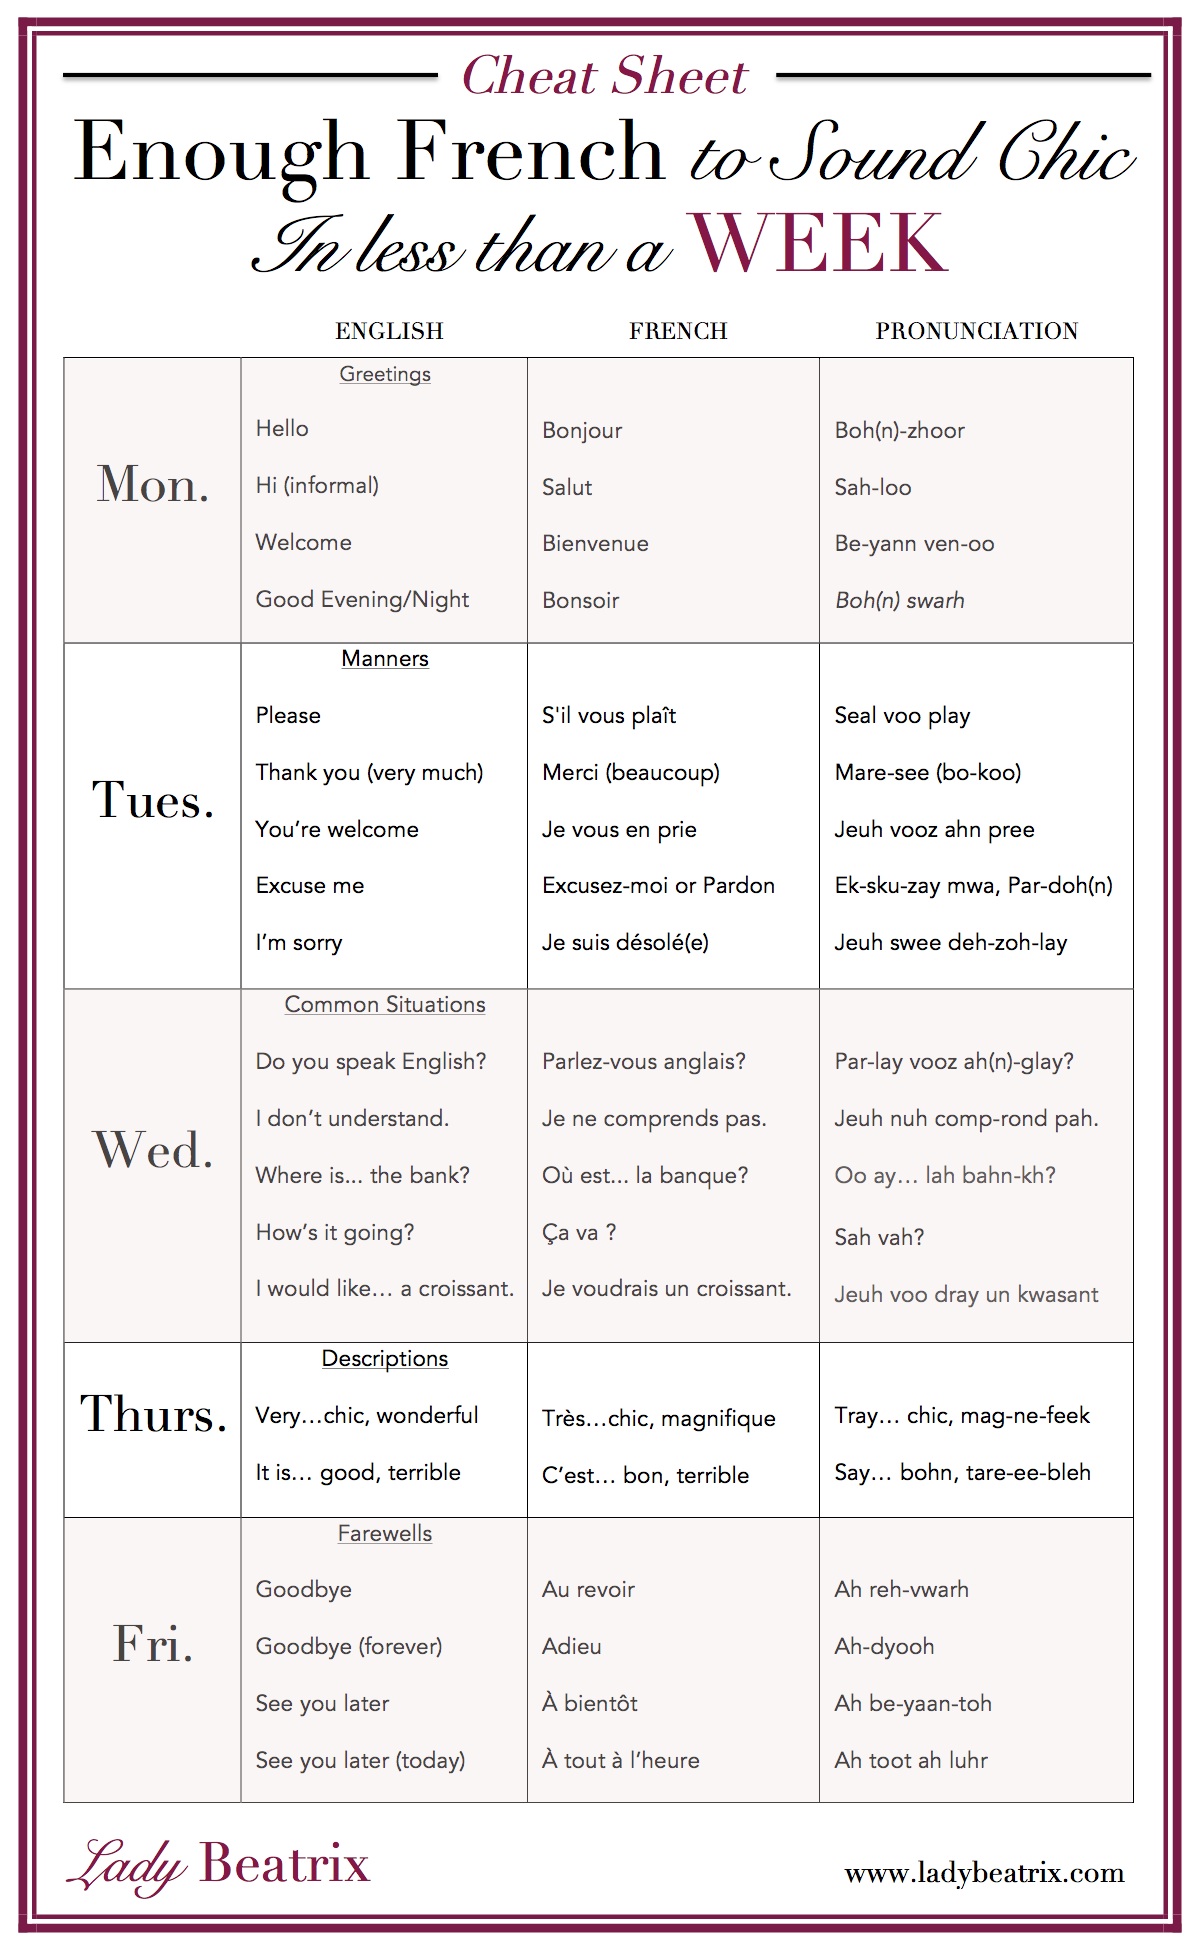 french-pronunciation-cheat-sheet-french-words-french-vocabulary-my